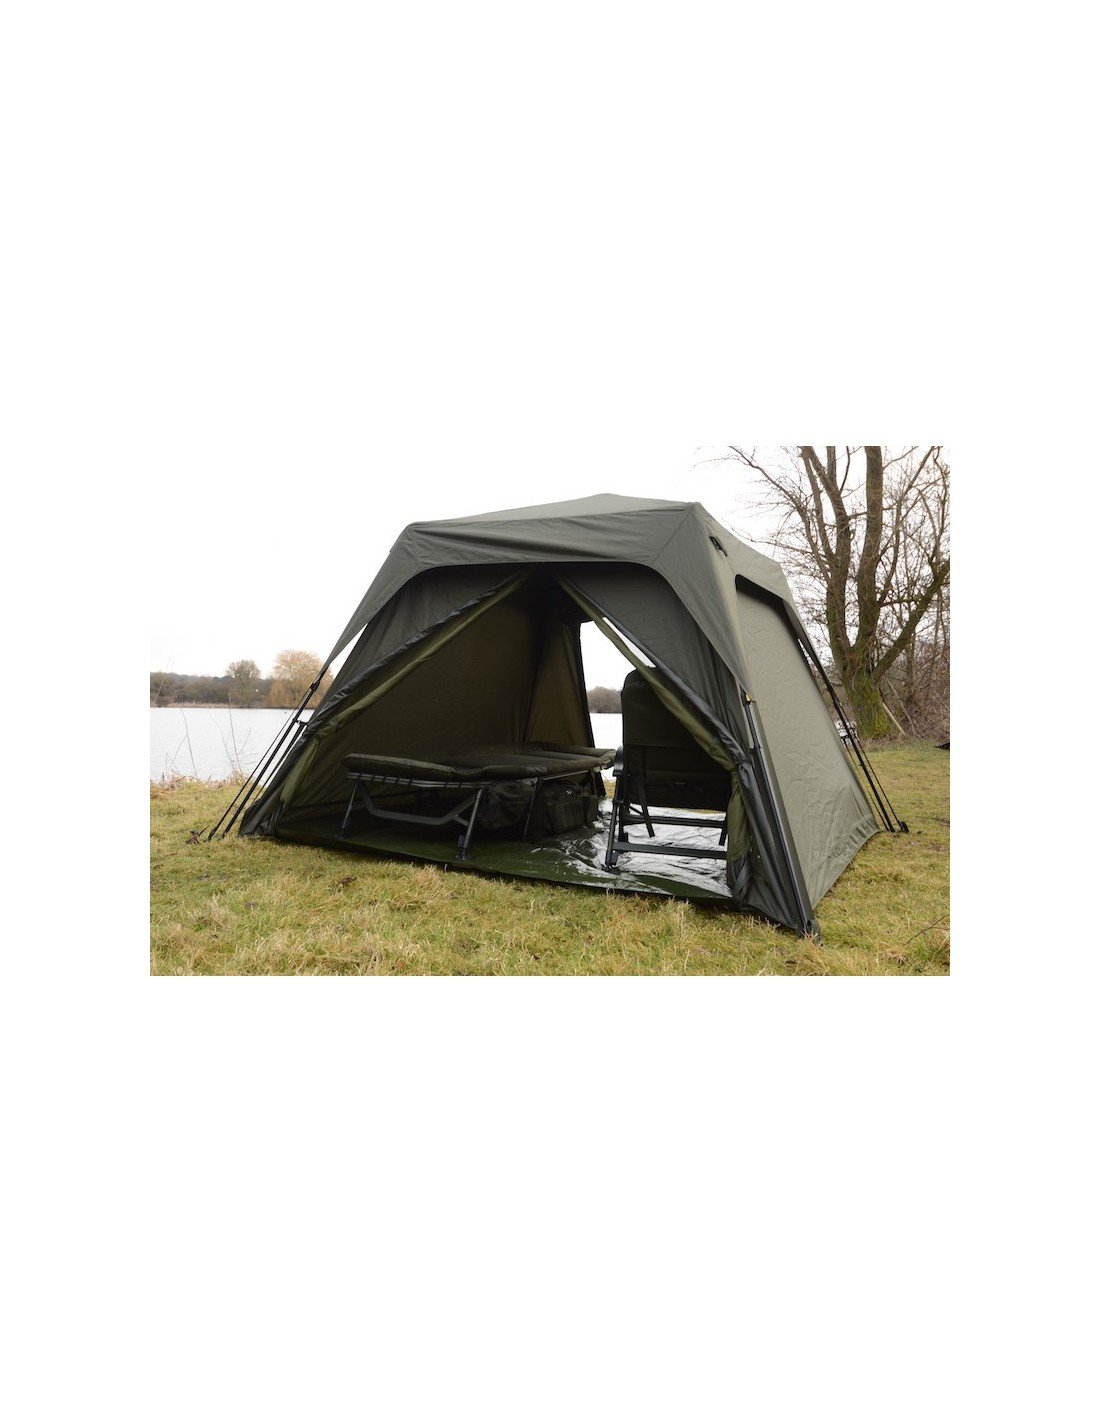 Solar Tackle SP Bankmaster Quick-Up Shelter шатра